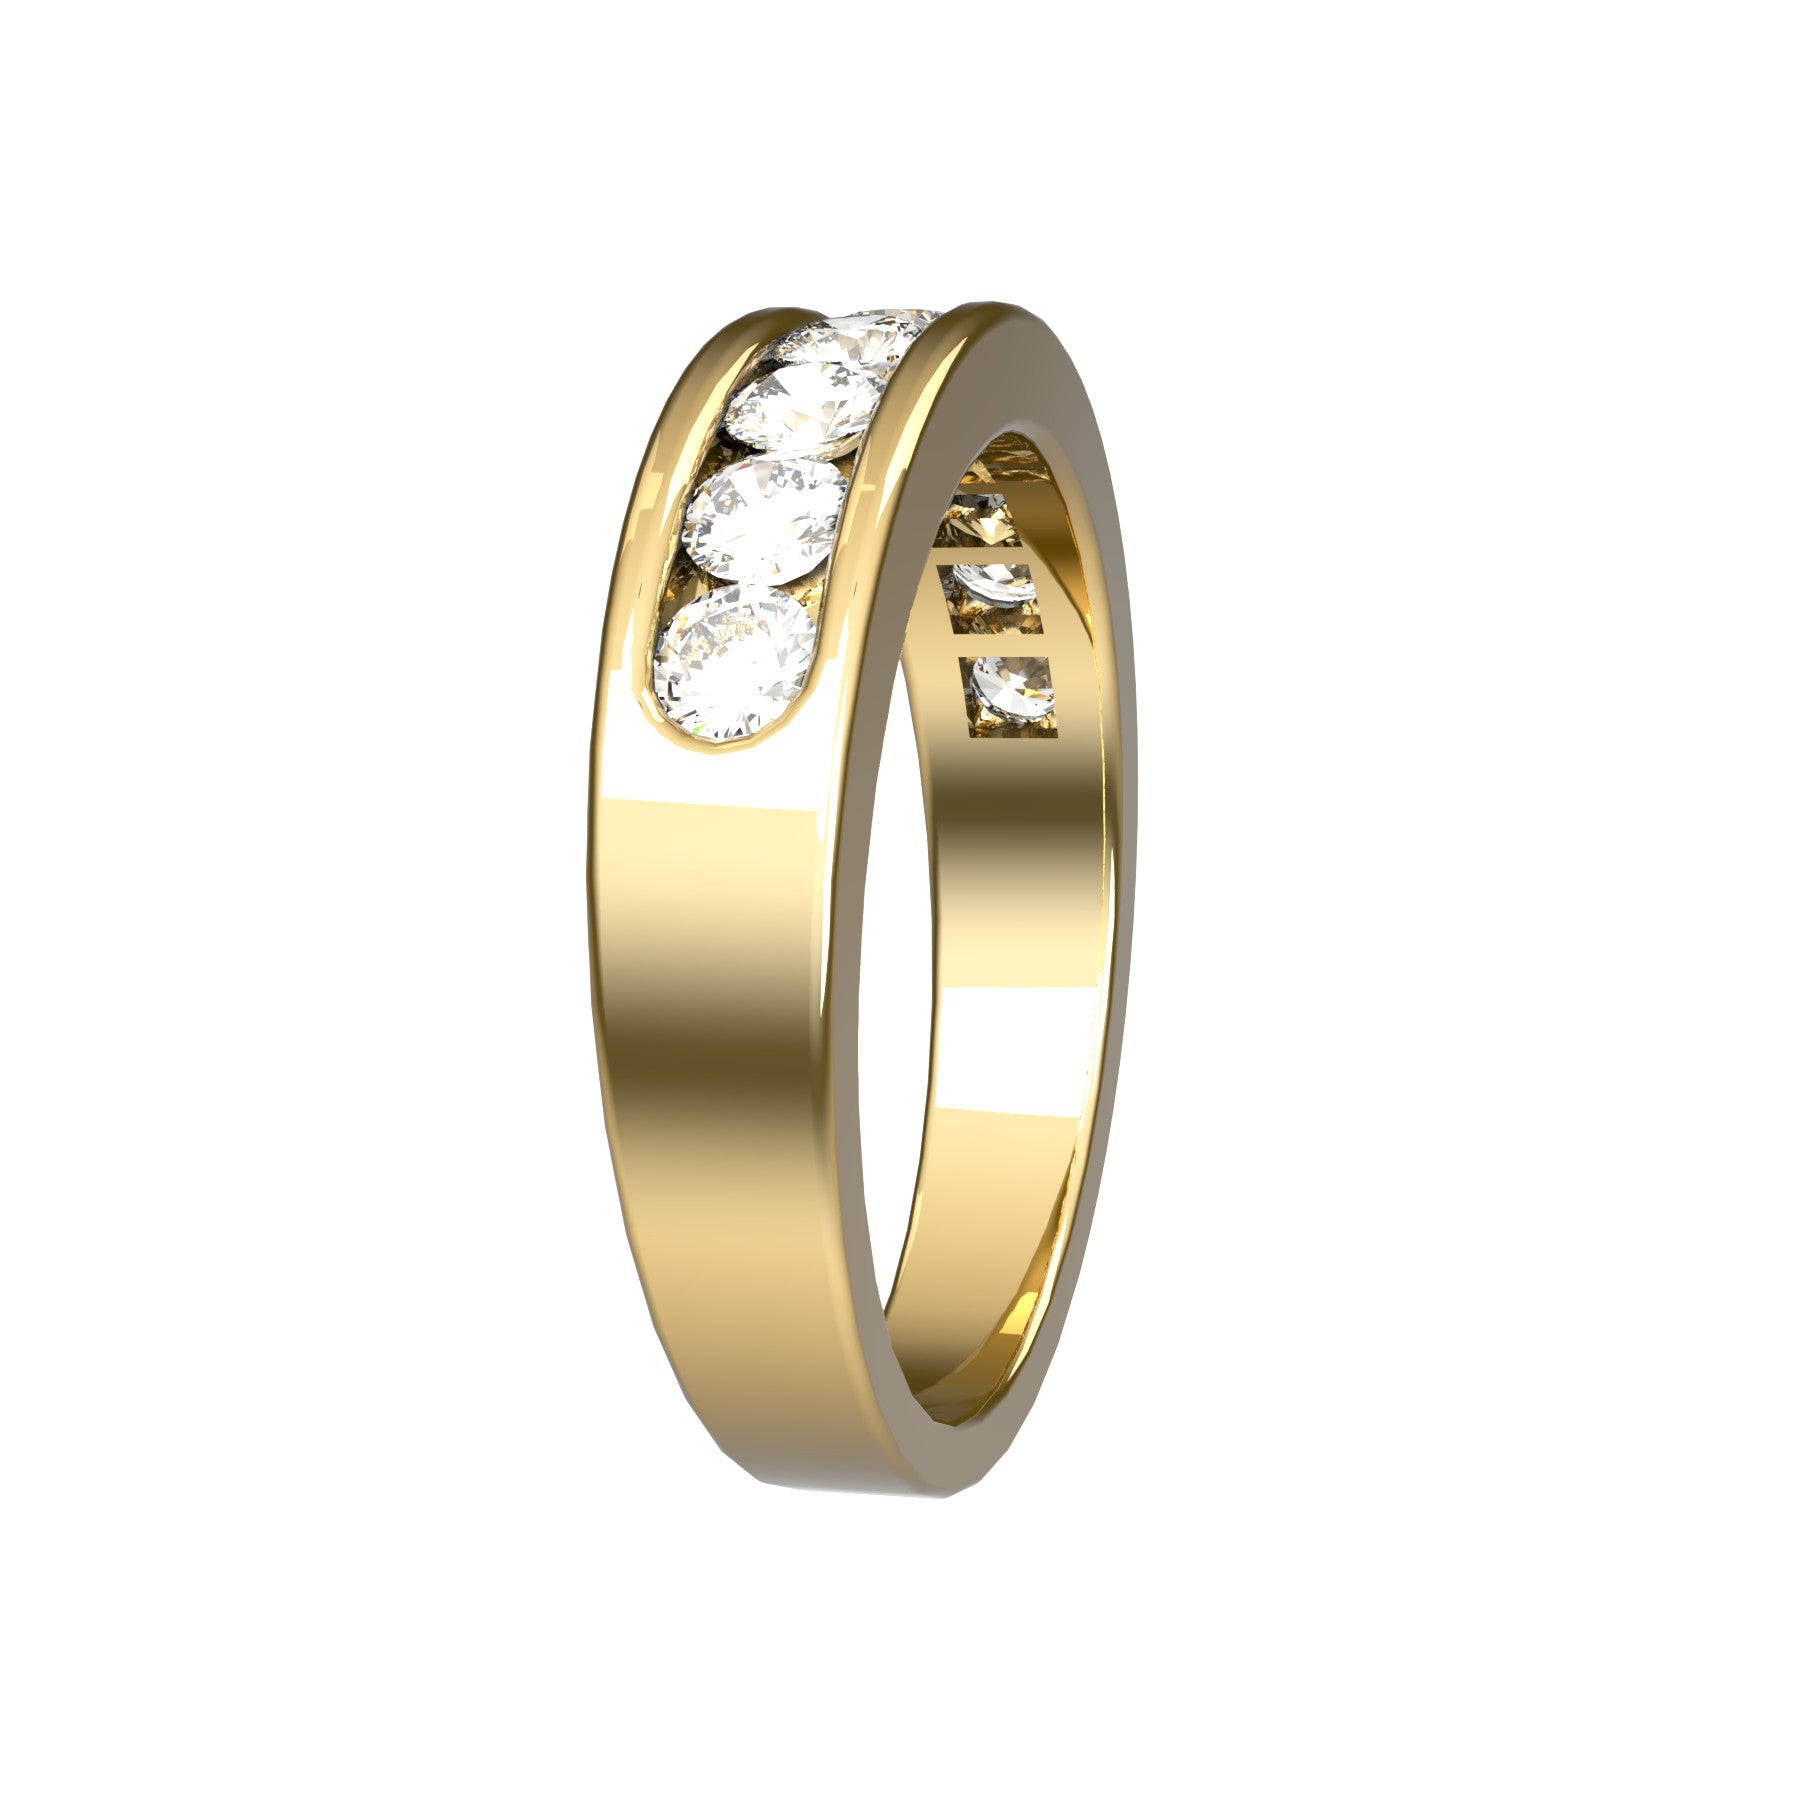 perpetual half wedding ring, 18 K yellow gold, 0,07 ct round natural diamond, weight about 4,5 g. (0.16 oz), width 4,70 mm